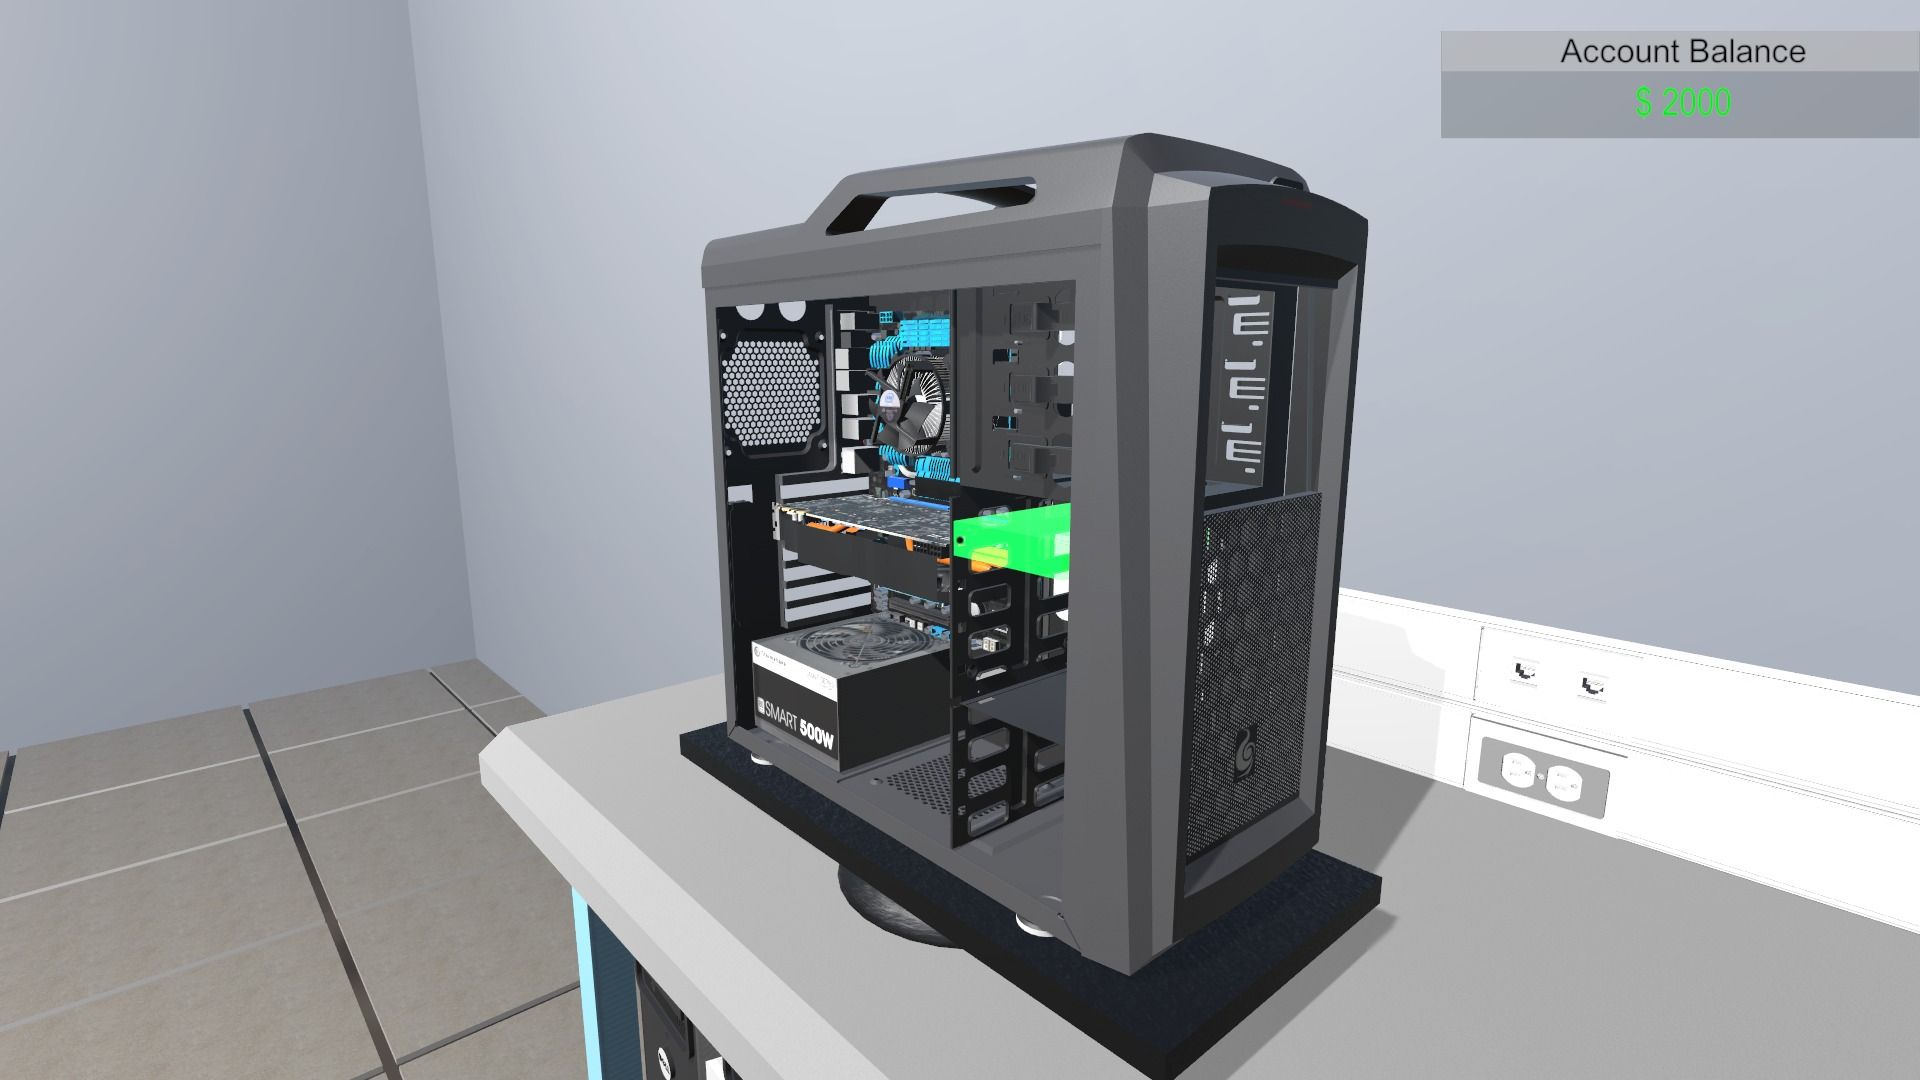 Meet PC Building Simulator, a DIY teaching tool that could be the novice's best friend